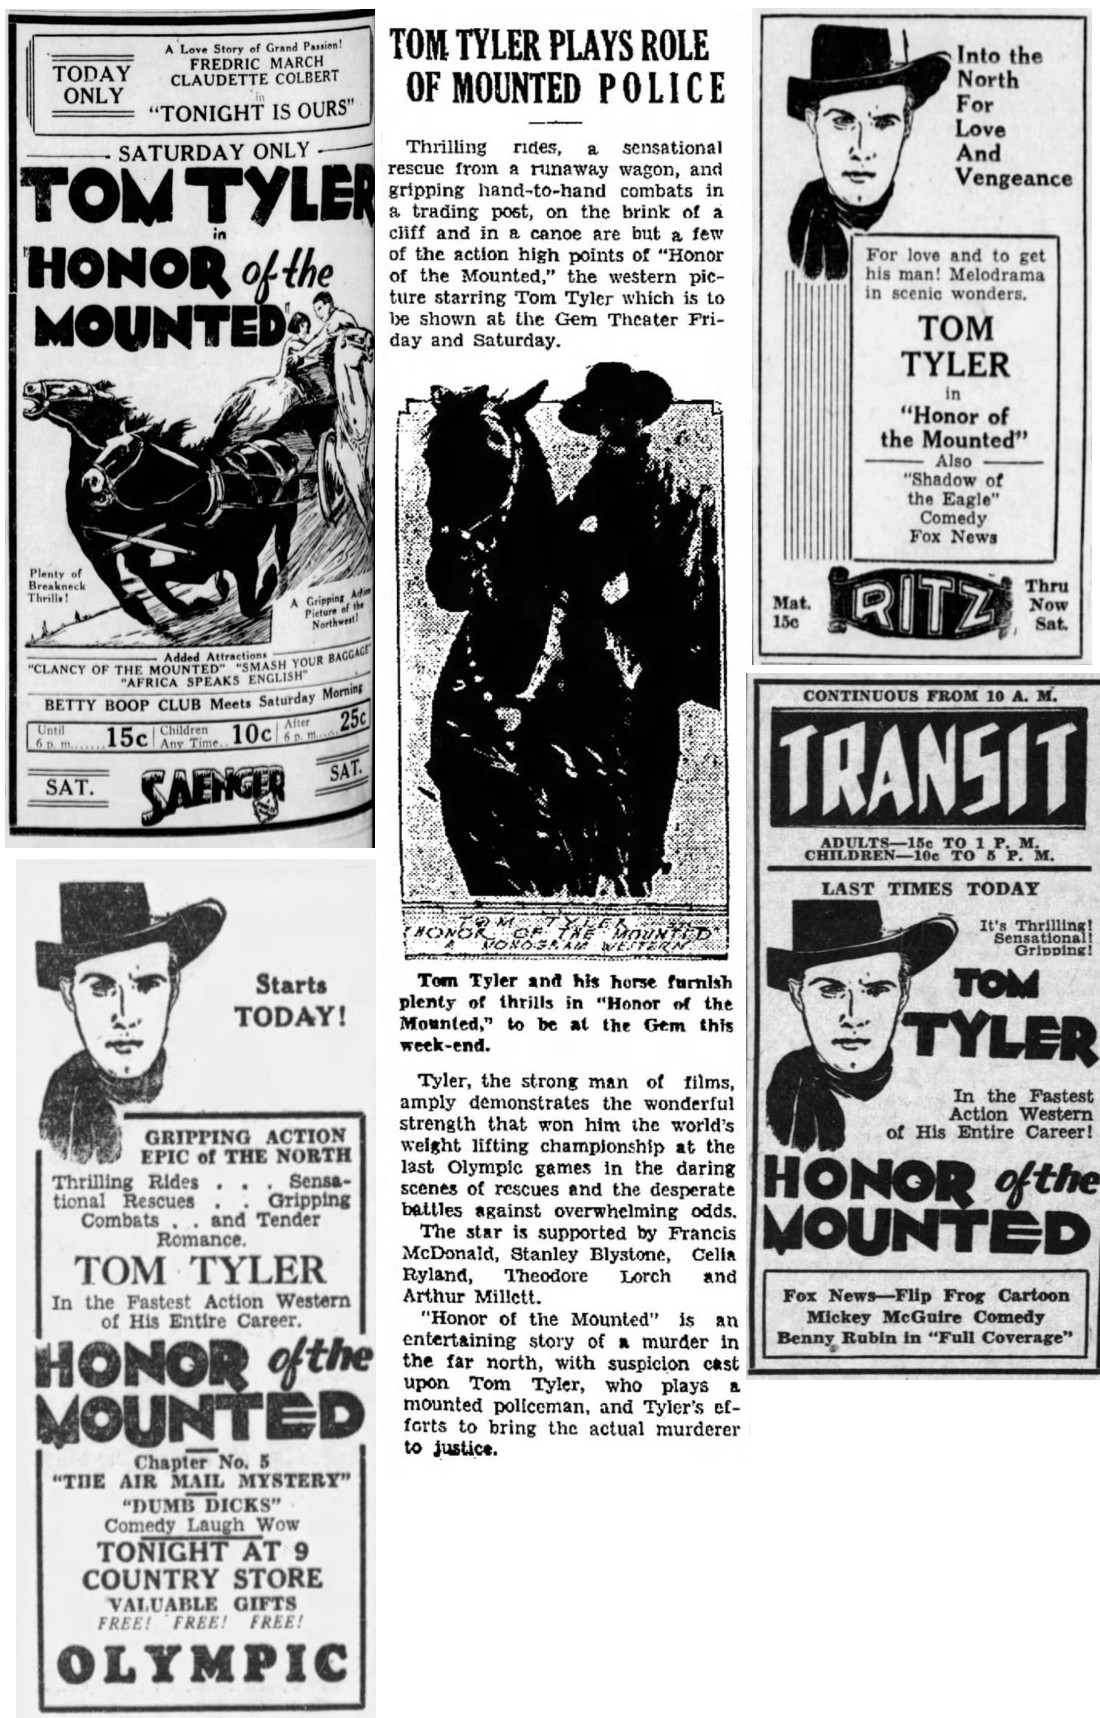 Honor of the Mounted cinema ads film reviews